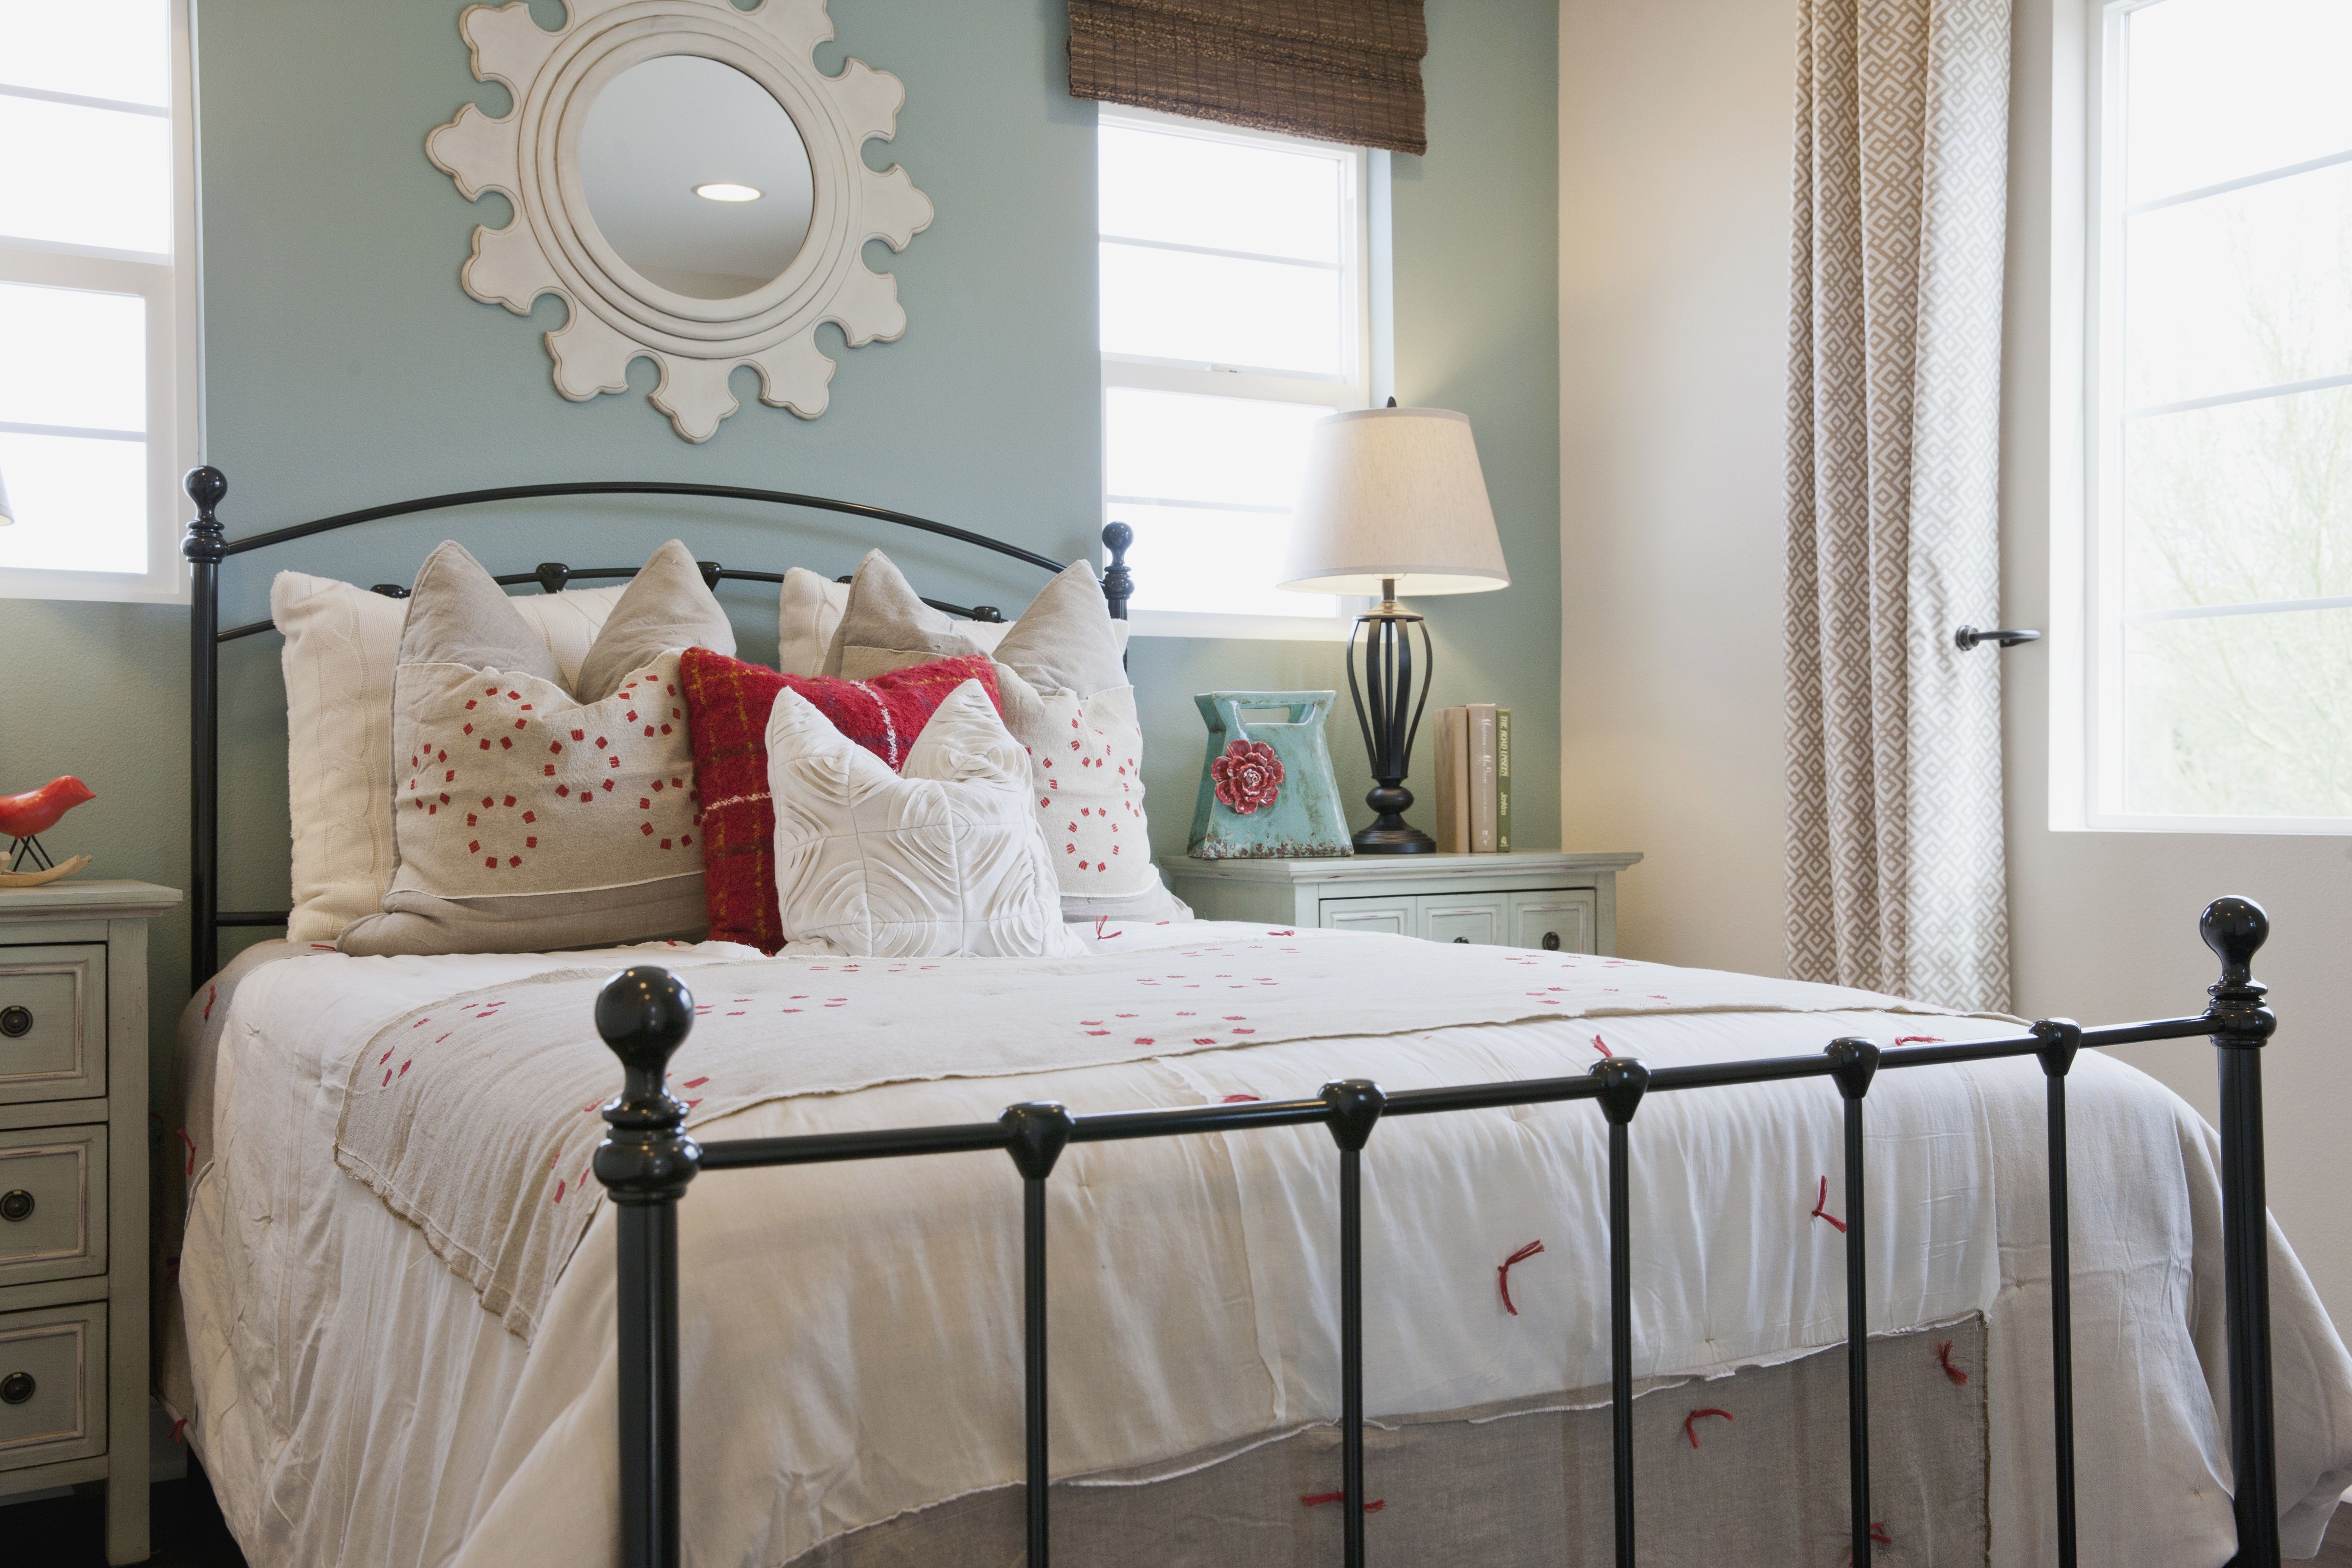 Photos and Tips for Decorating a Shabby Chic Bedroom